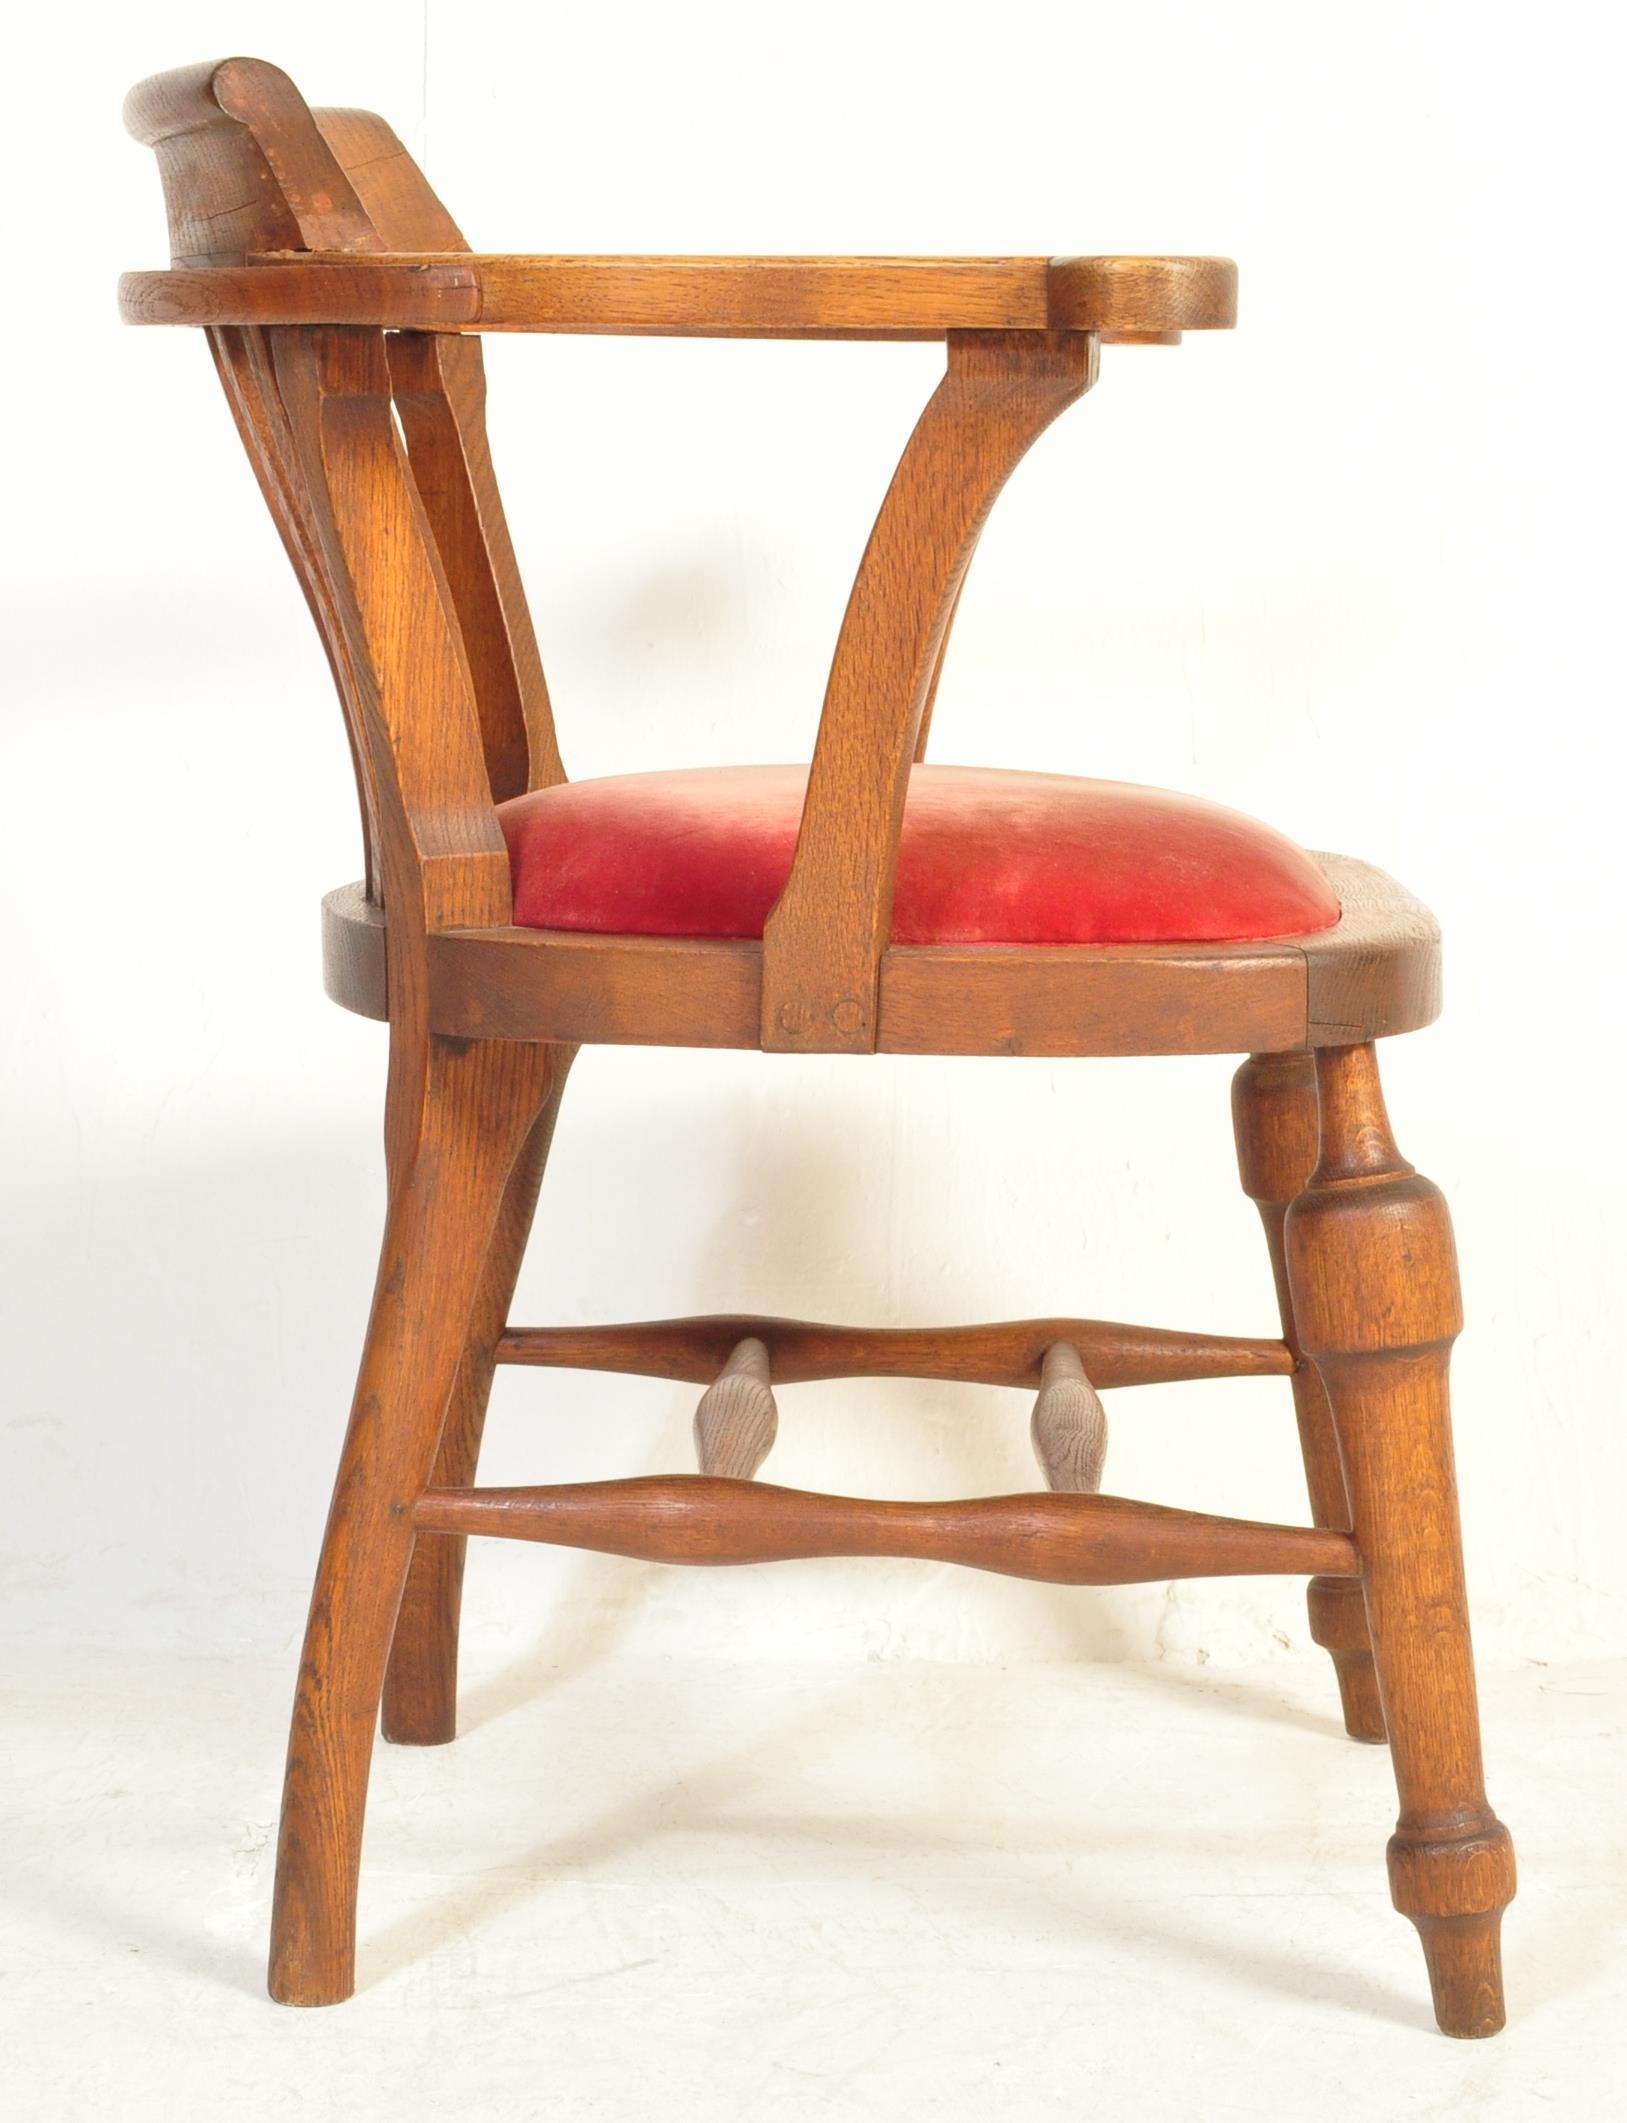 EDWARDIAN MAHOGANY INLAID UPHOLSTERED BEDROOM CHAIR - Image 4 of 5